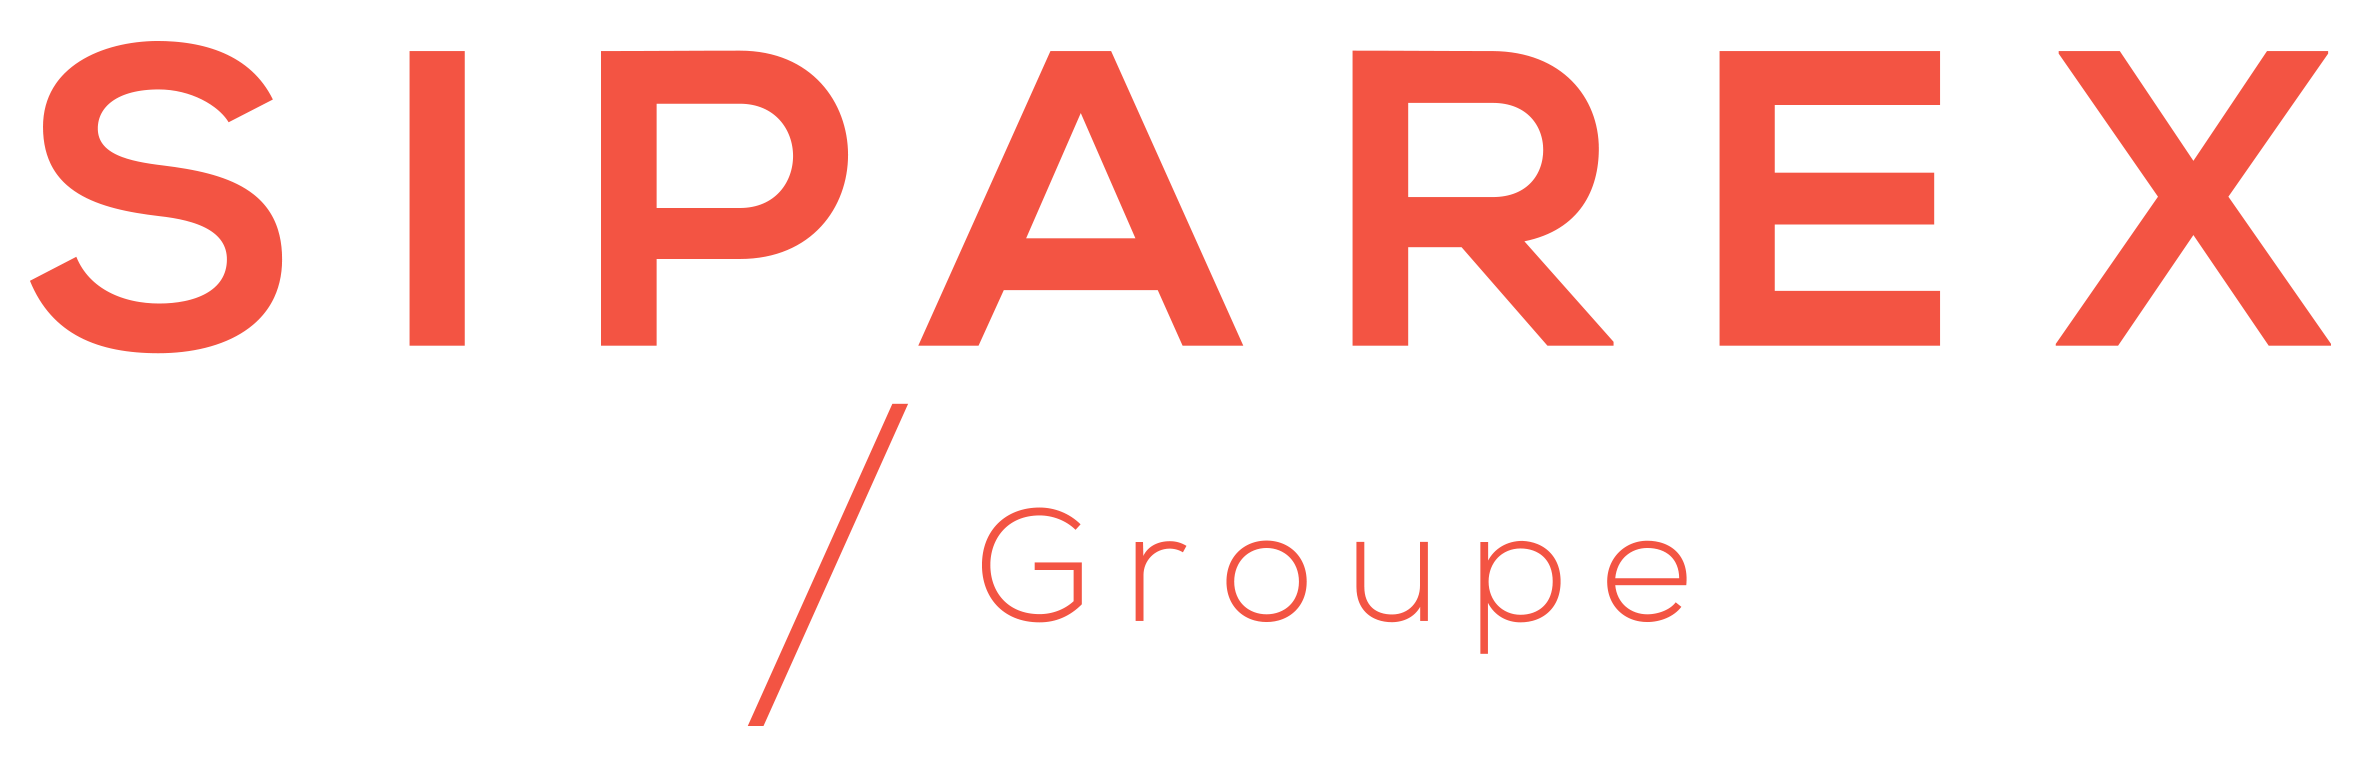 Groupe Siparex